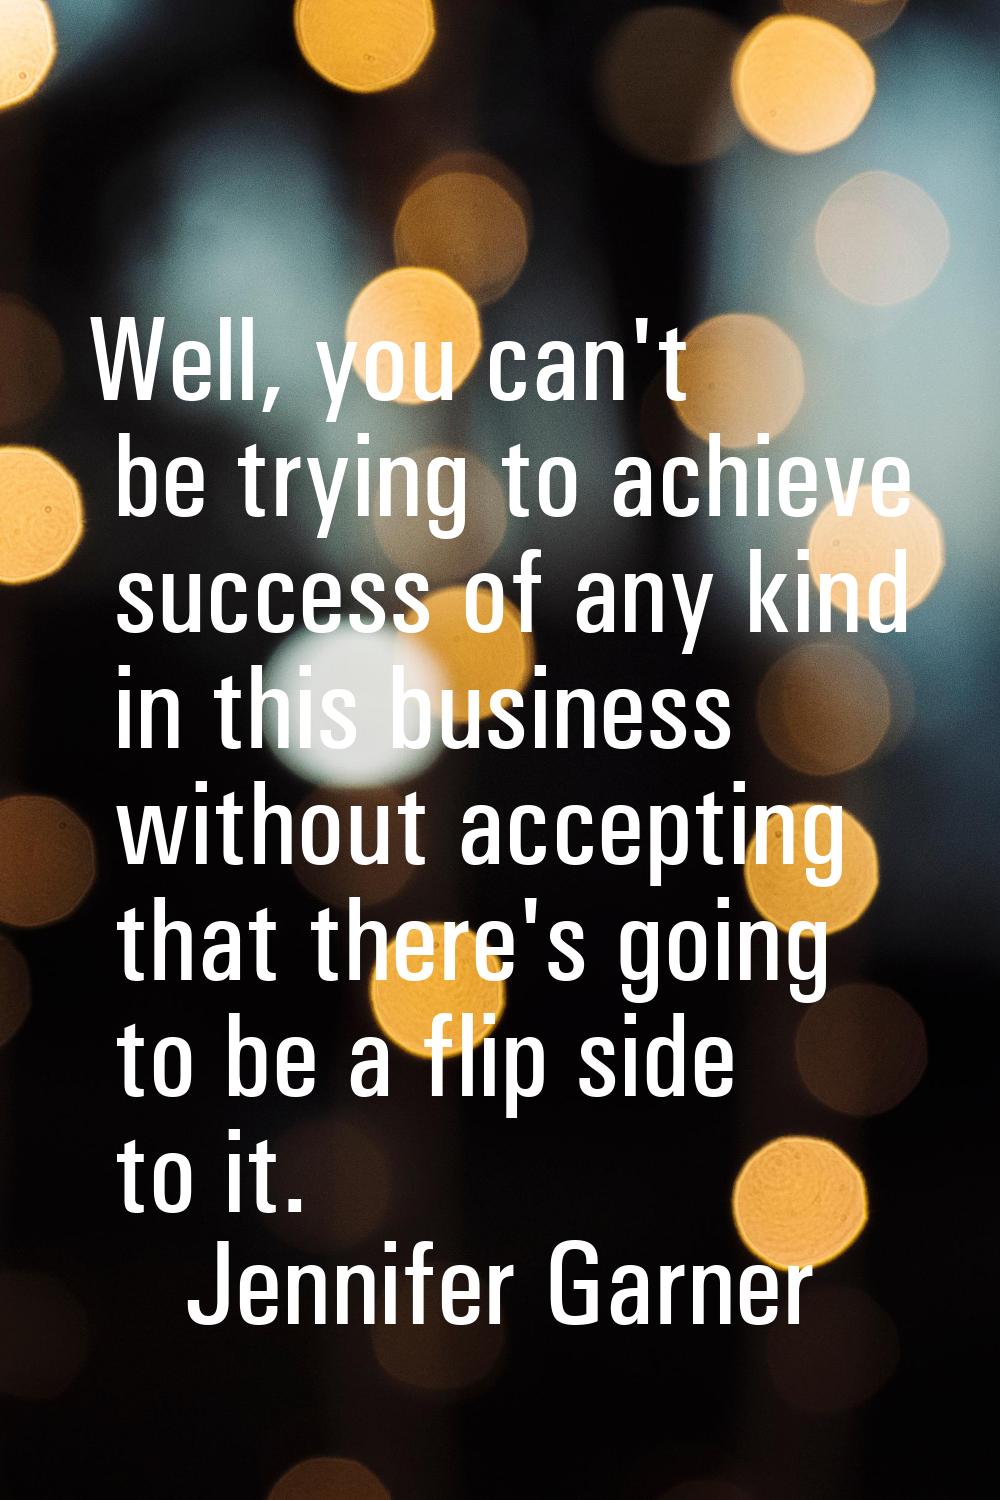 Well, you can't be trying to achieve success of any kind in this business without accepting that th